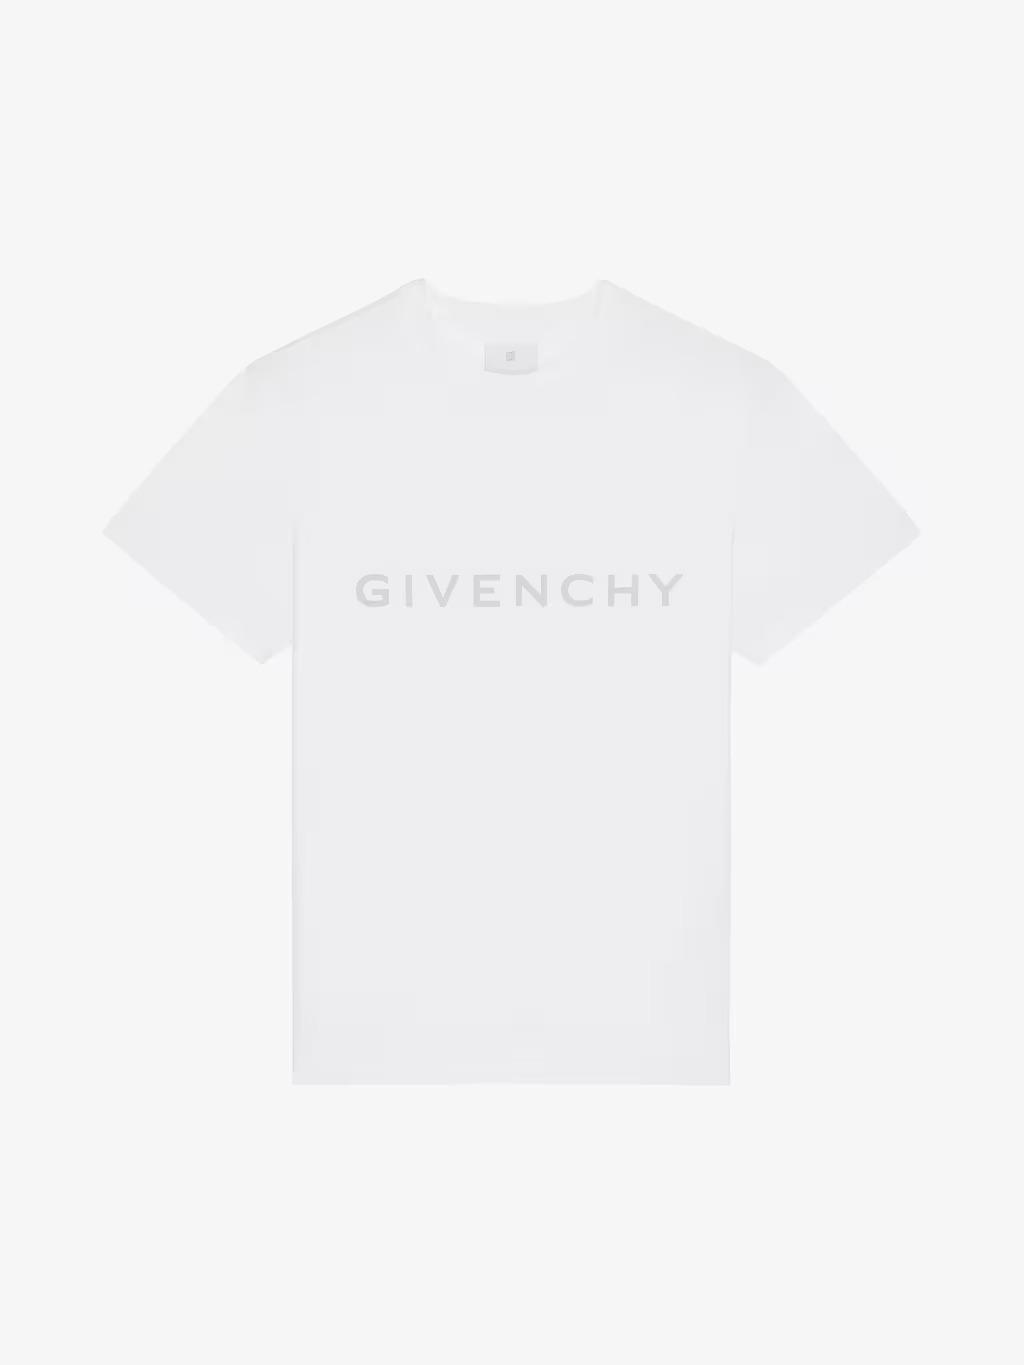 reflective-givenchy-slim-fit-t-shirt-in-cotton-6834_16845015971-1000